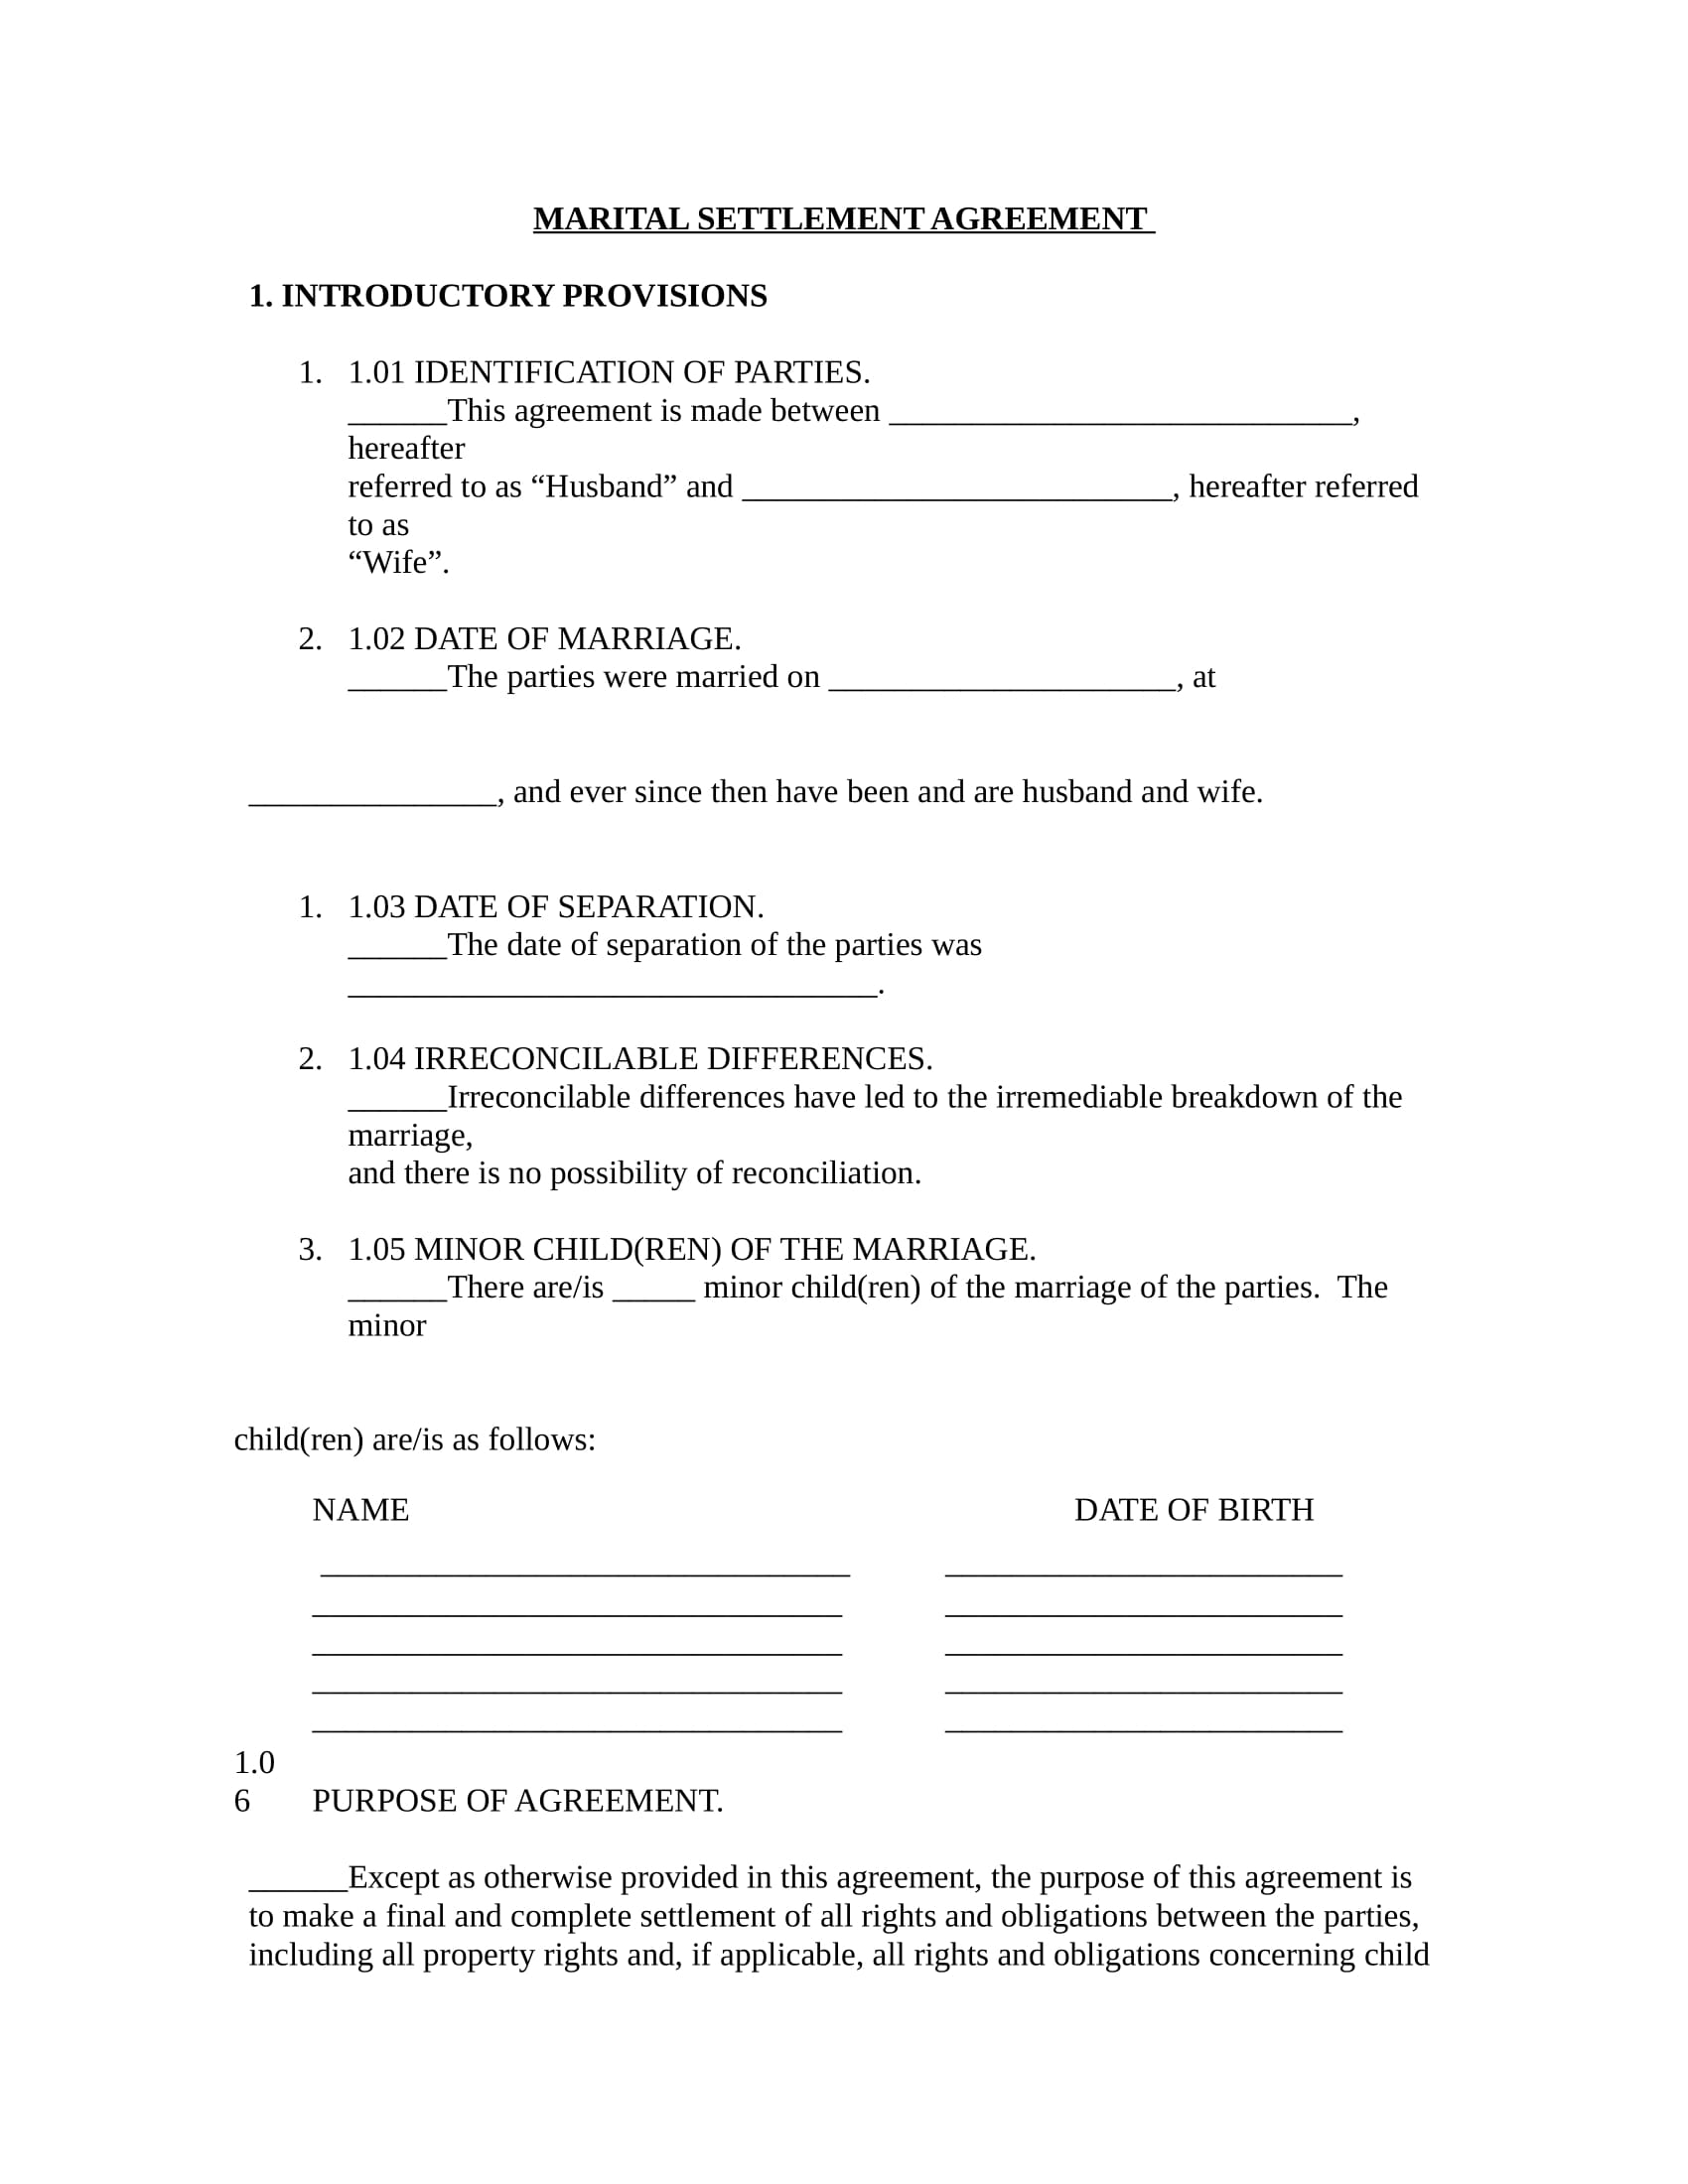 domestic marital settlement agreement contract in doc 01